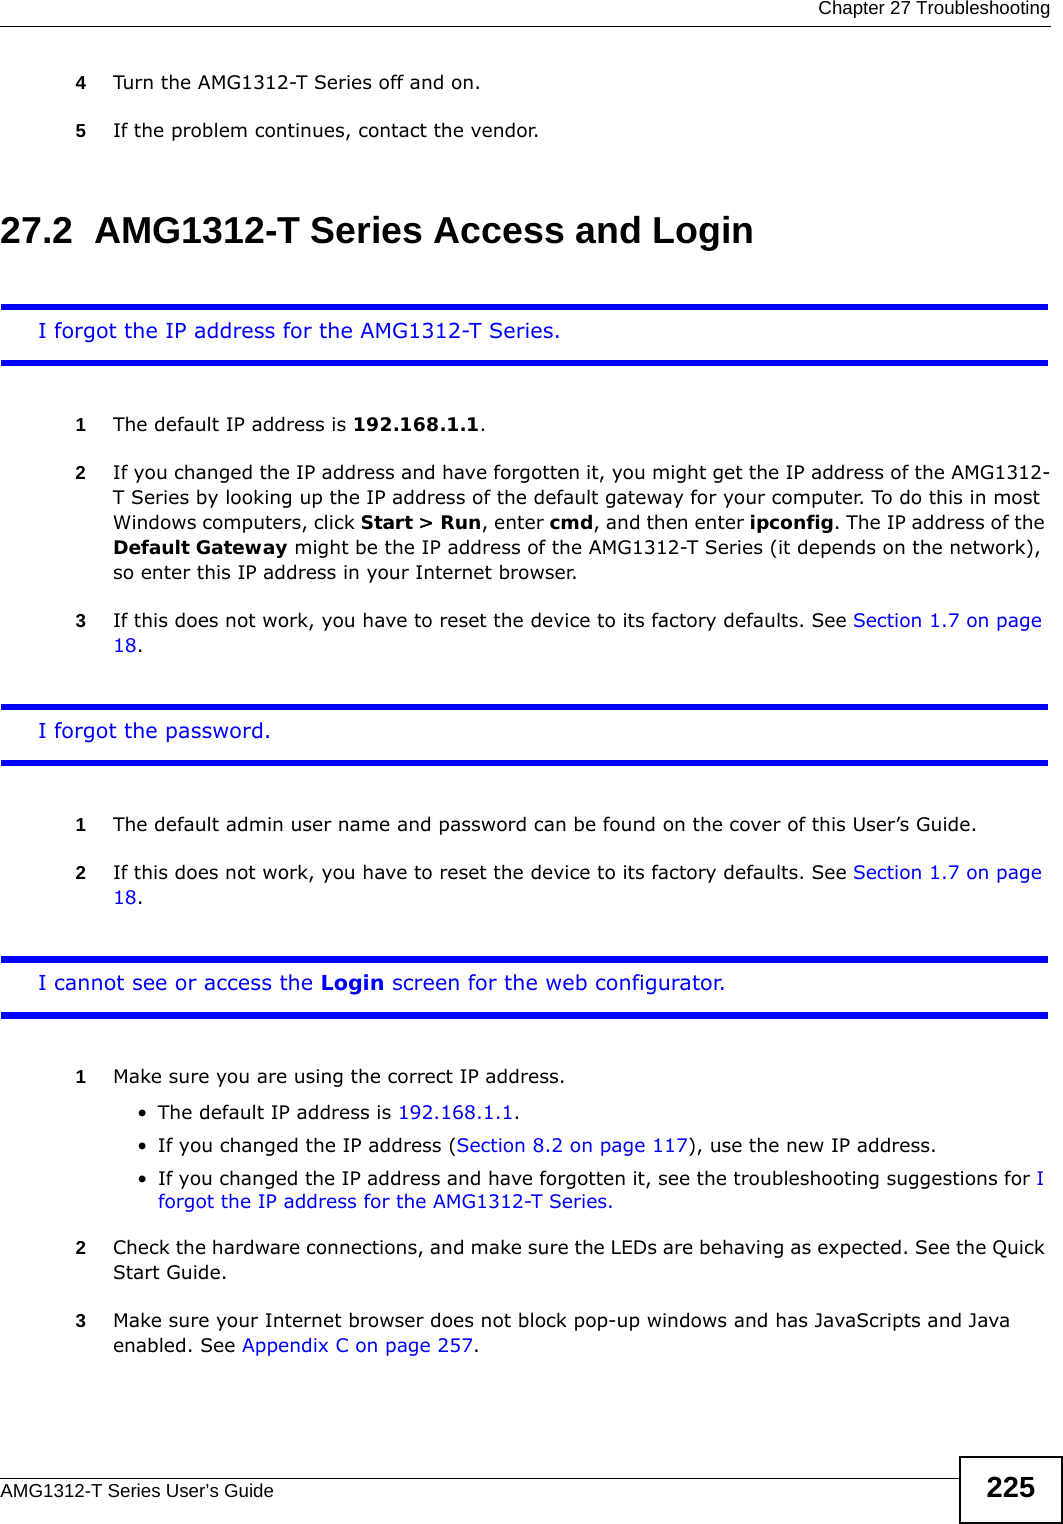  Chapter 27 TroubleshootingAMG1312-T Series User’s Guide 2254Turn the AMG1312-T Series off and on.5If the problem continues, contact the vendor.27.2  AMG1312-T Series Access and LoginI forgot the IP address for the AMG1312-T Series.1The default IP address is 192.168.1.1.2If you changed the IP address and have forgotten it, you might get the IP address of the AMG1312-T Series by looking up the IP address of the default gateway for your computer. To do this in most Windows computers, click Start &gt; Run, enter cmd, and then enter ipconfig. The IP address of the Default Gateway might be the IP address of the AMG1312-T Series (it depends on the network), so enter this IP address in your Internet browser.3If this does not work, you have to reset the device to its factory defaults. See Section 1.7 on page 18.I forgot the password.1The default admin user name and password can be found on the cover of this User’s Guide.2If this does not work, you have to reset the device to its factory defaults. See Section 1.7 on page 18.I cannot see or access the Login screen for the web configurator.1Make sure you are using the correct IP address.• The default IP address is 192.168.1.1.• If you changed the IP address (Section 8.2 on page 117), use the new IP address.• If you changed the IP address and have forgotten it, see the troubleshooting suggestions for I forgot the IP address for the AMG1312-T Series.2Check the hardware connections, and make sure the LEDs are behaving as expected. See the Quick Start Guide.3Make sure your Internet browser does not block pop-up windows and has JavaScripts and Java enabled. See Appendix C on page 257.